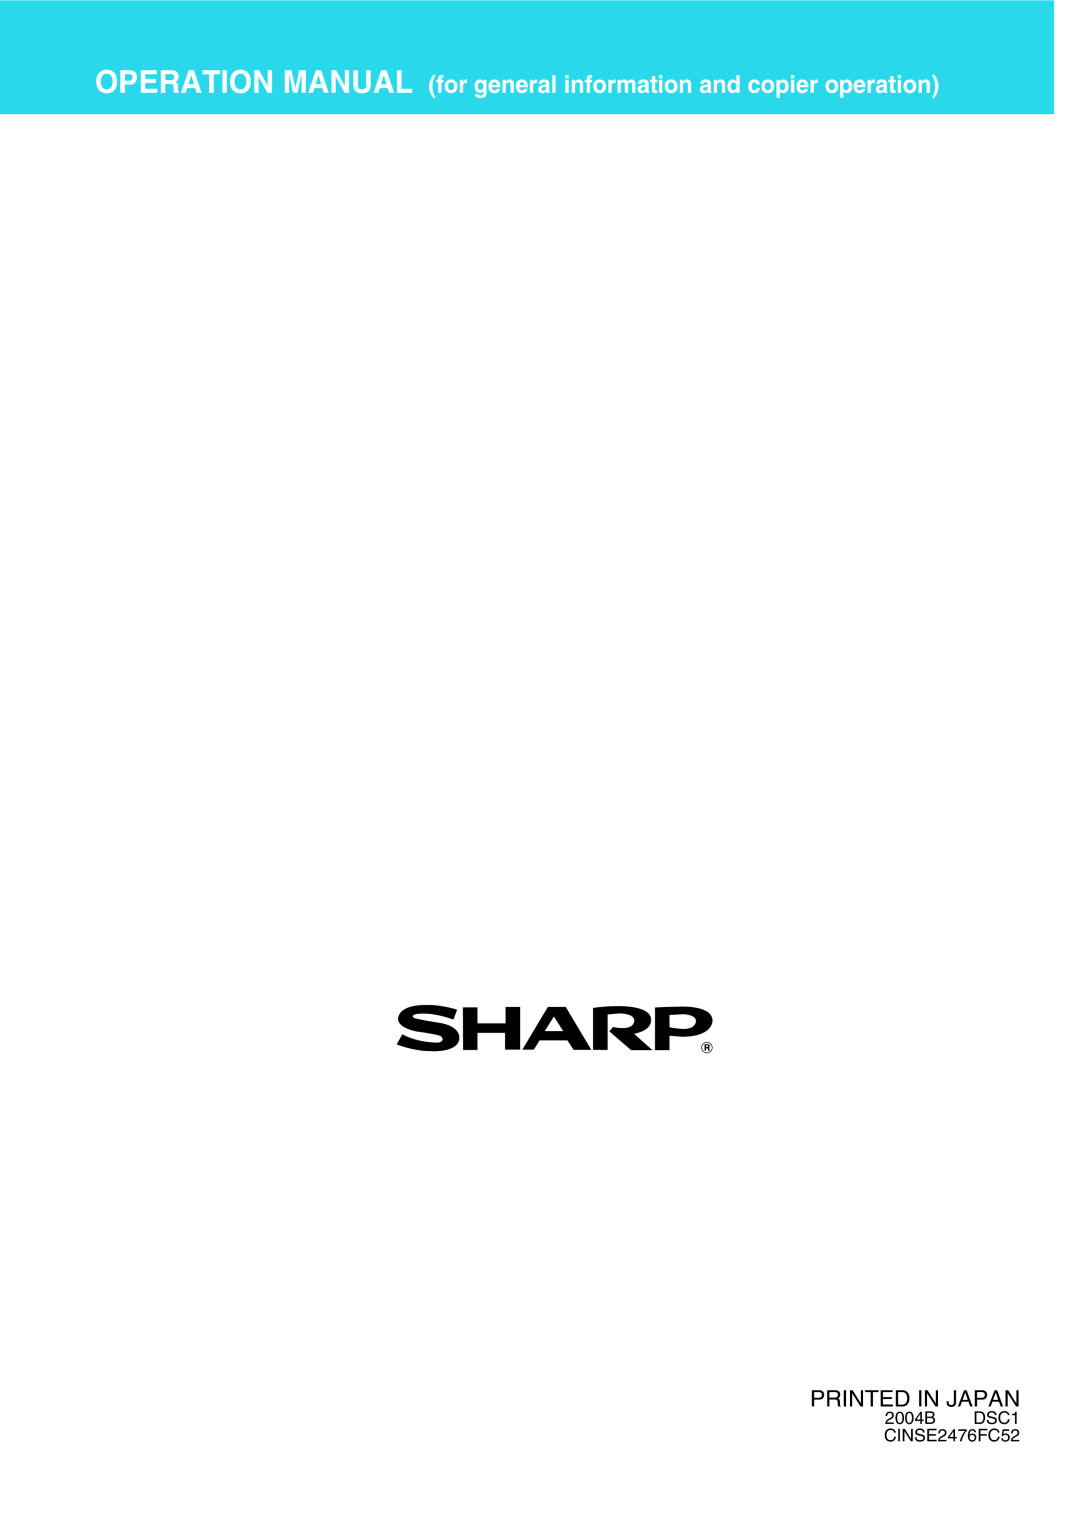 Sharp AR-M550U, AR-M700U, AR-M550N, AR-M620N OPERATION MANUAL for general information and copier operation, Printed In Japan 